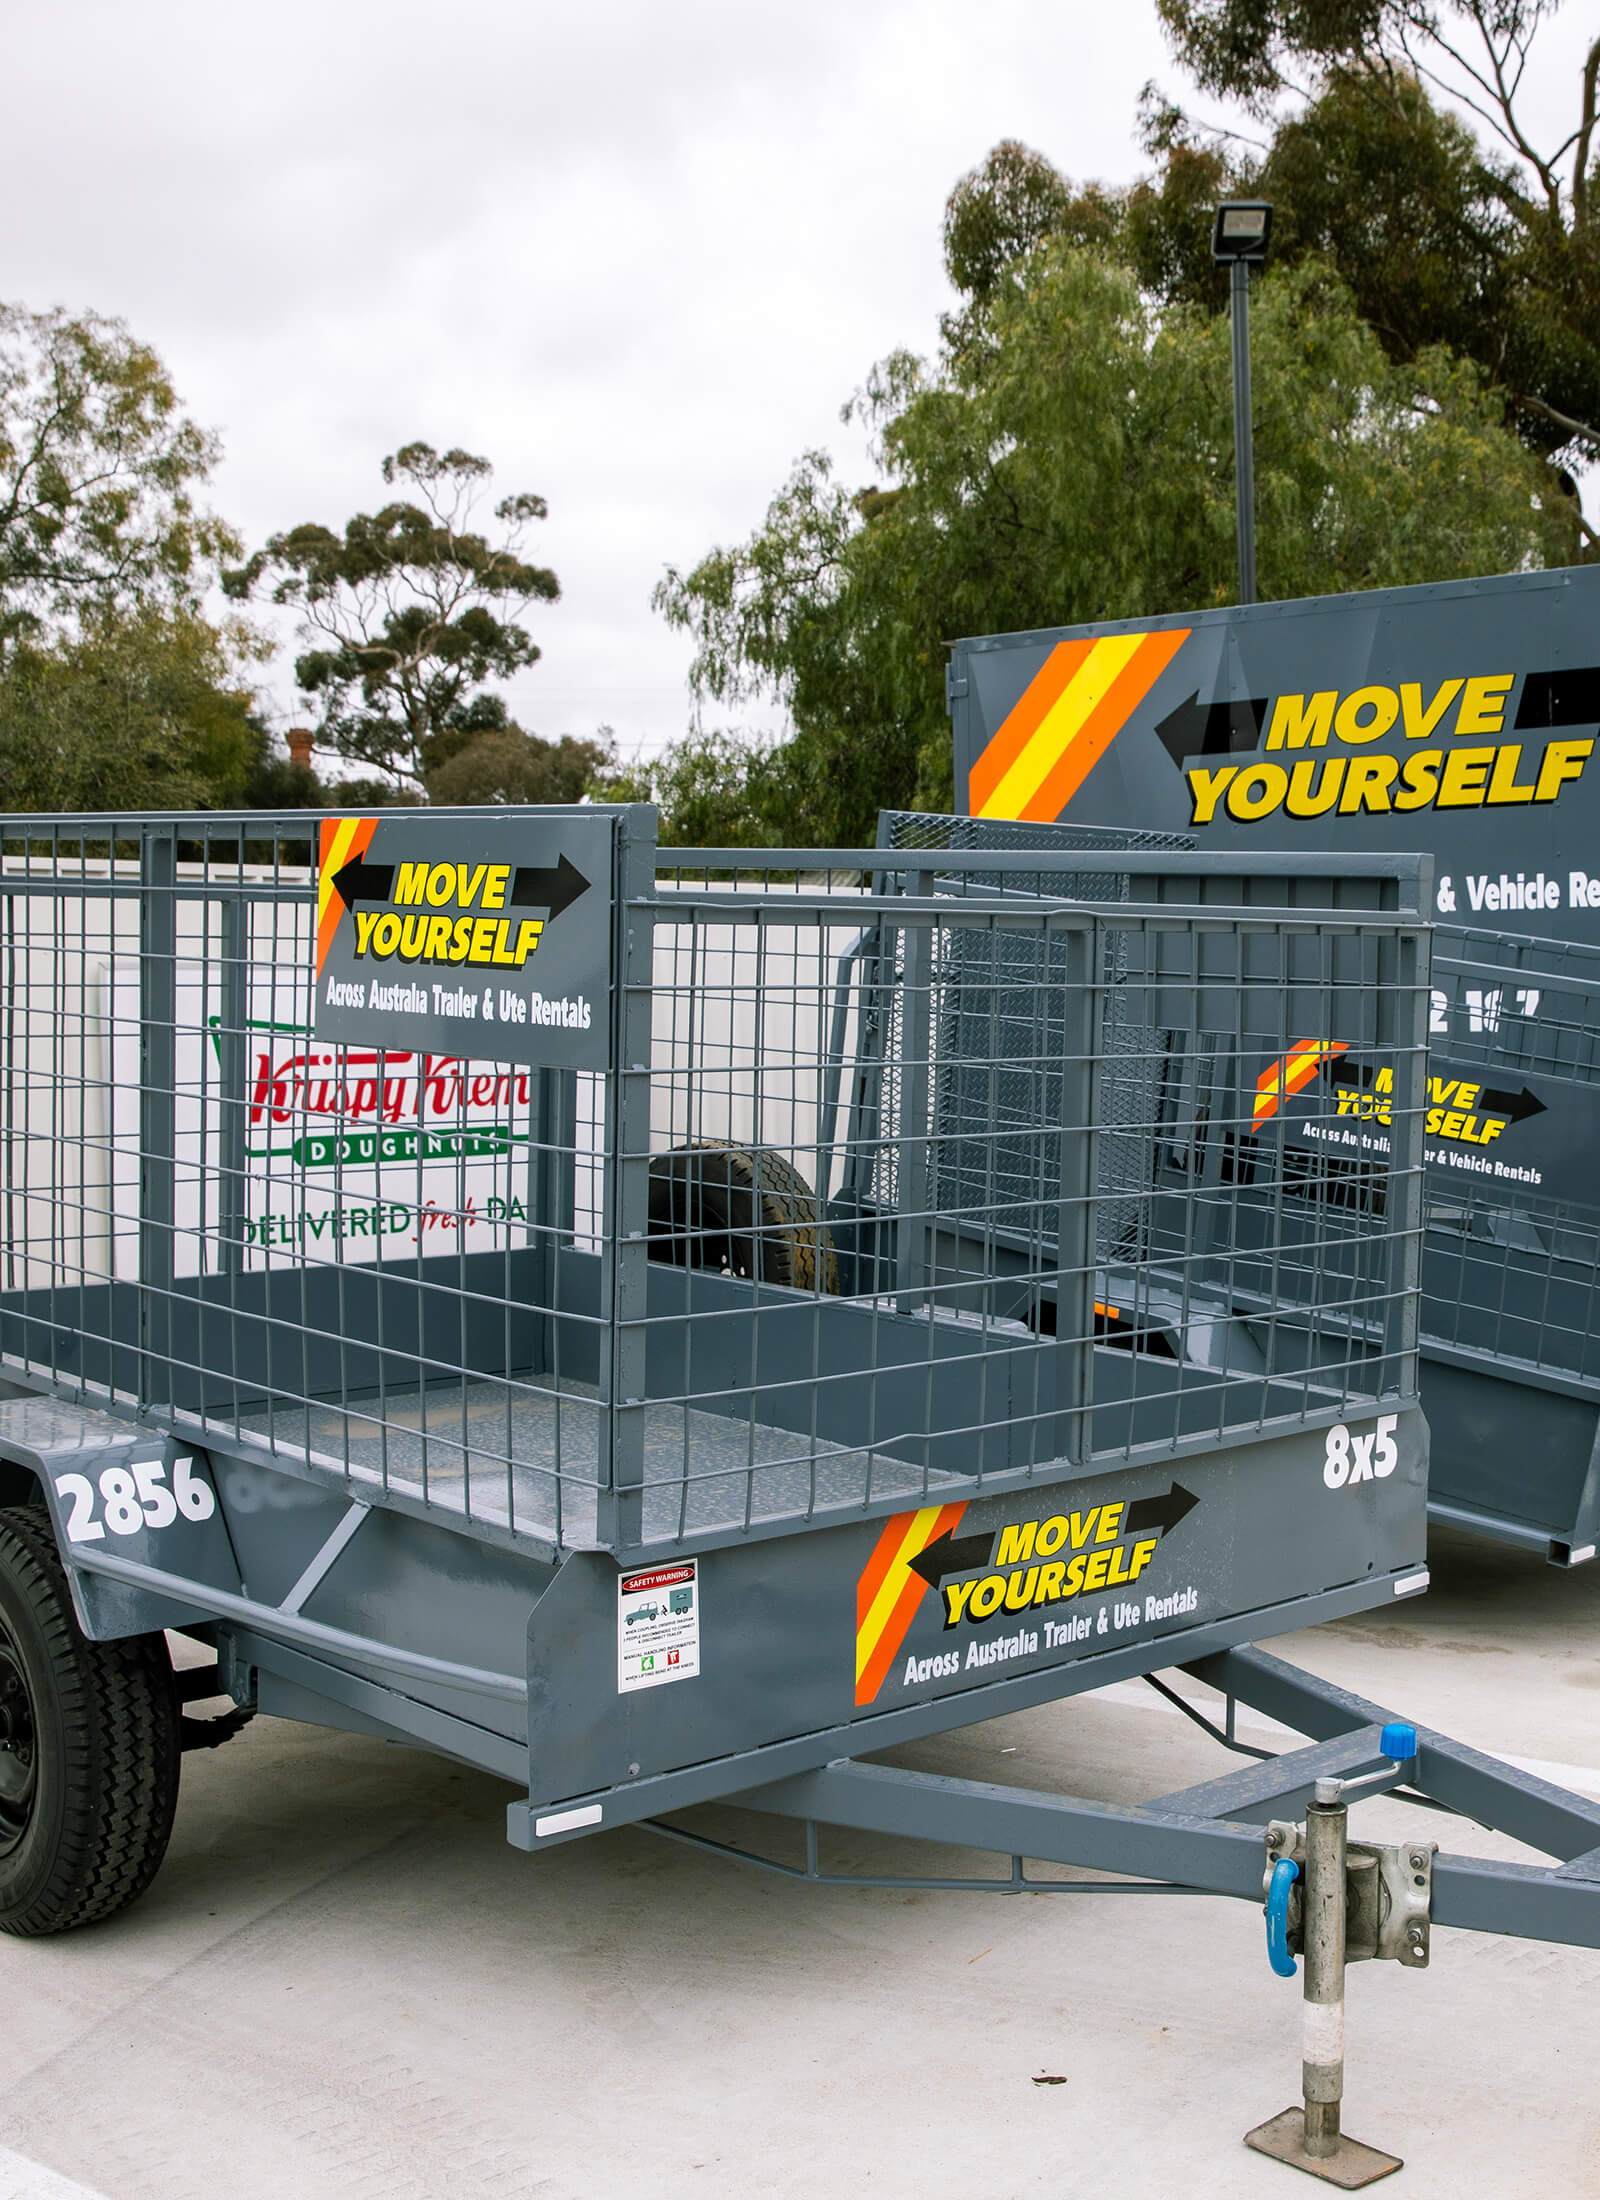 Move Yourself Trailer Hire - Hire a trailer for moving furniture, garden waste, rubbish, cars or bikes